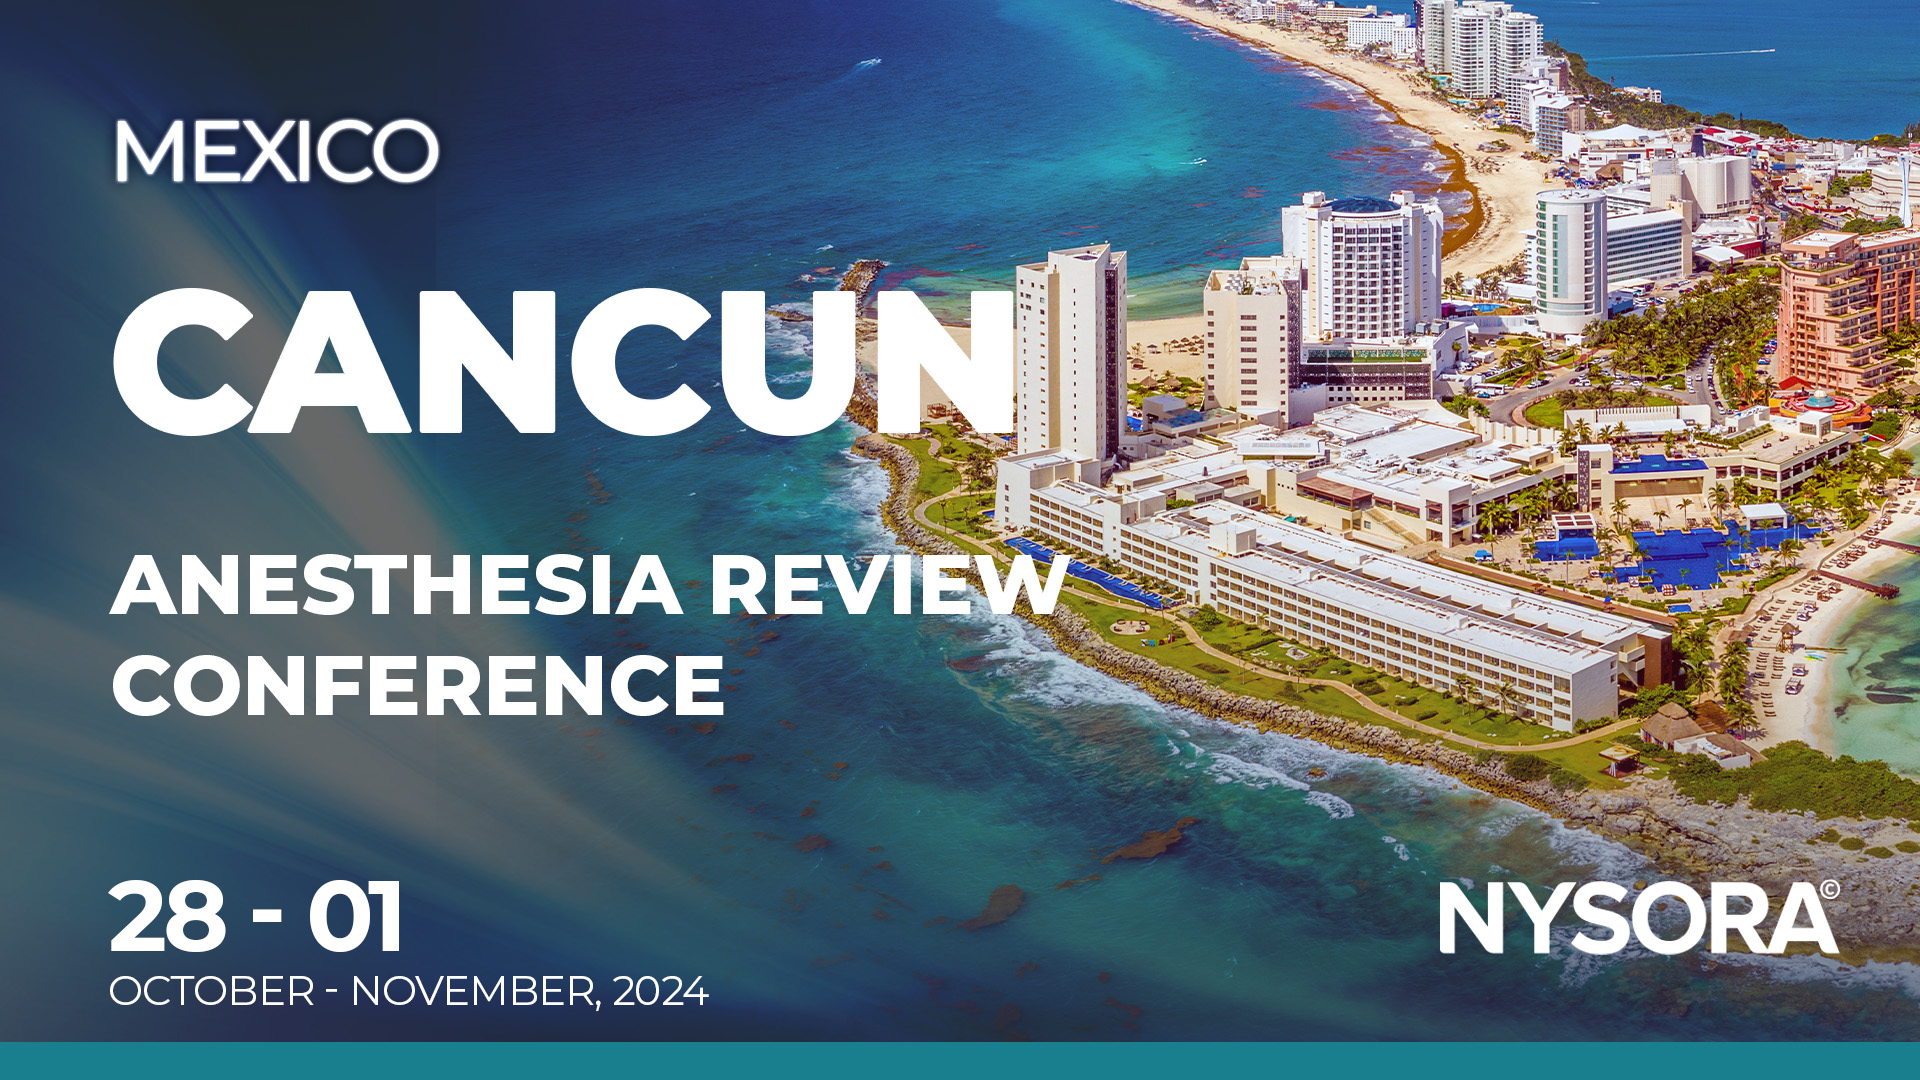 Anesthesia Review Conference (Cancun, Mexico) NYSORA